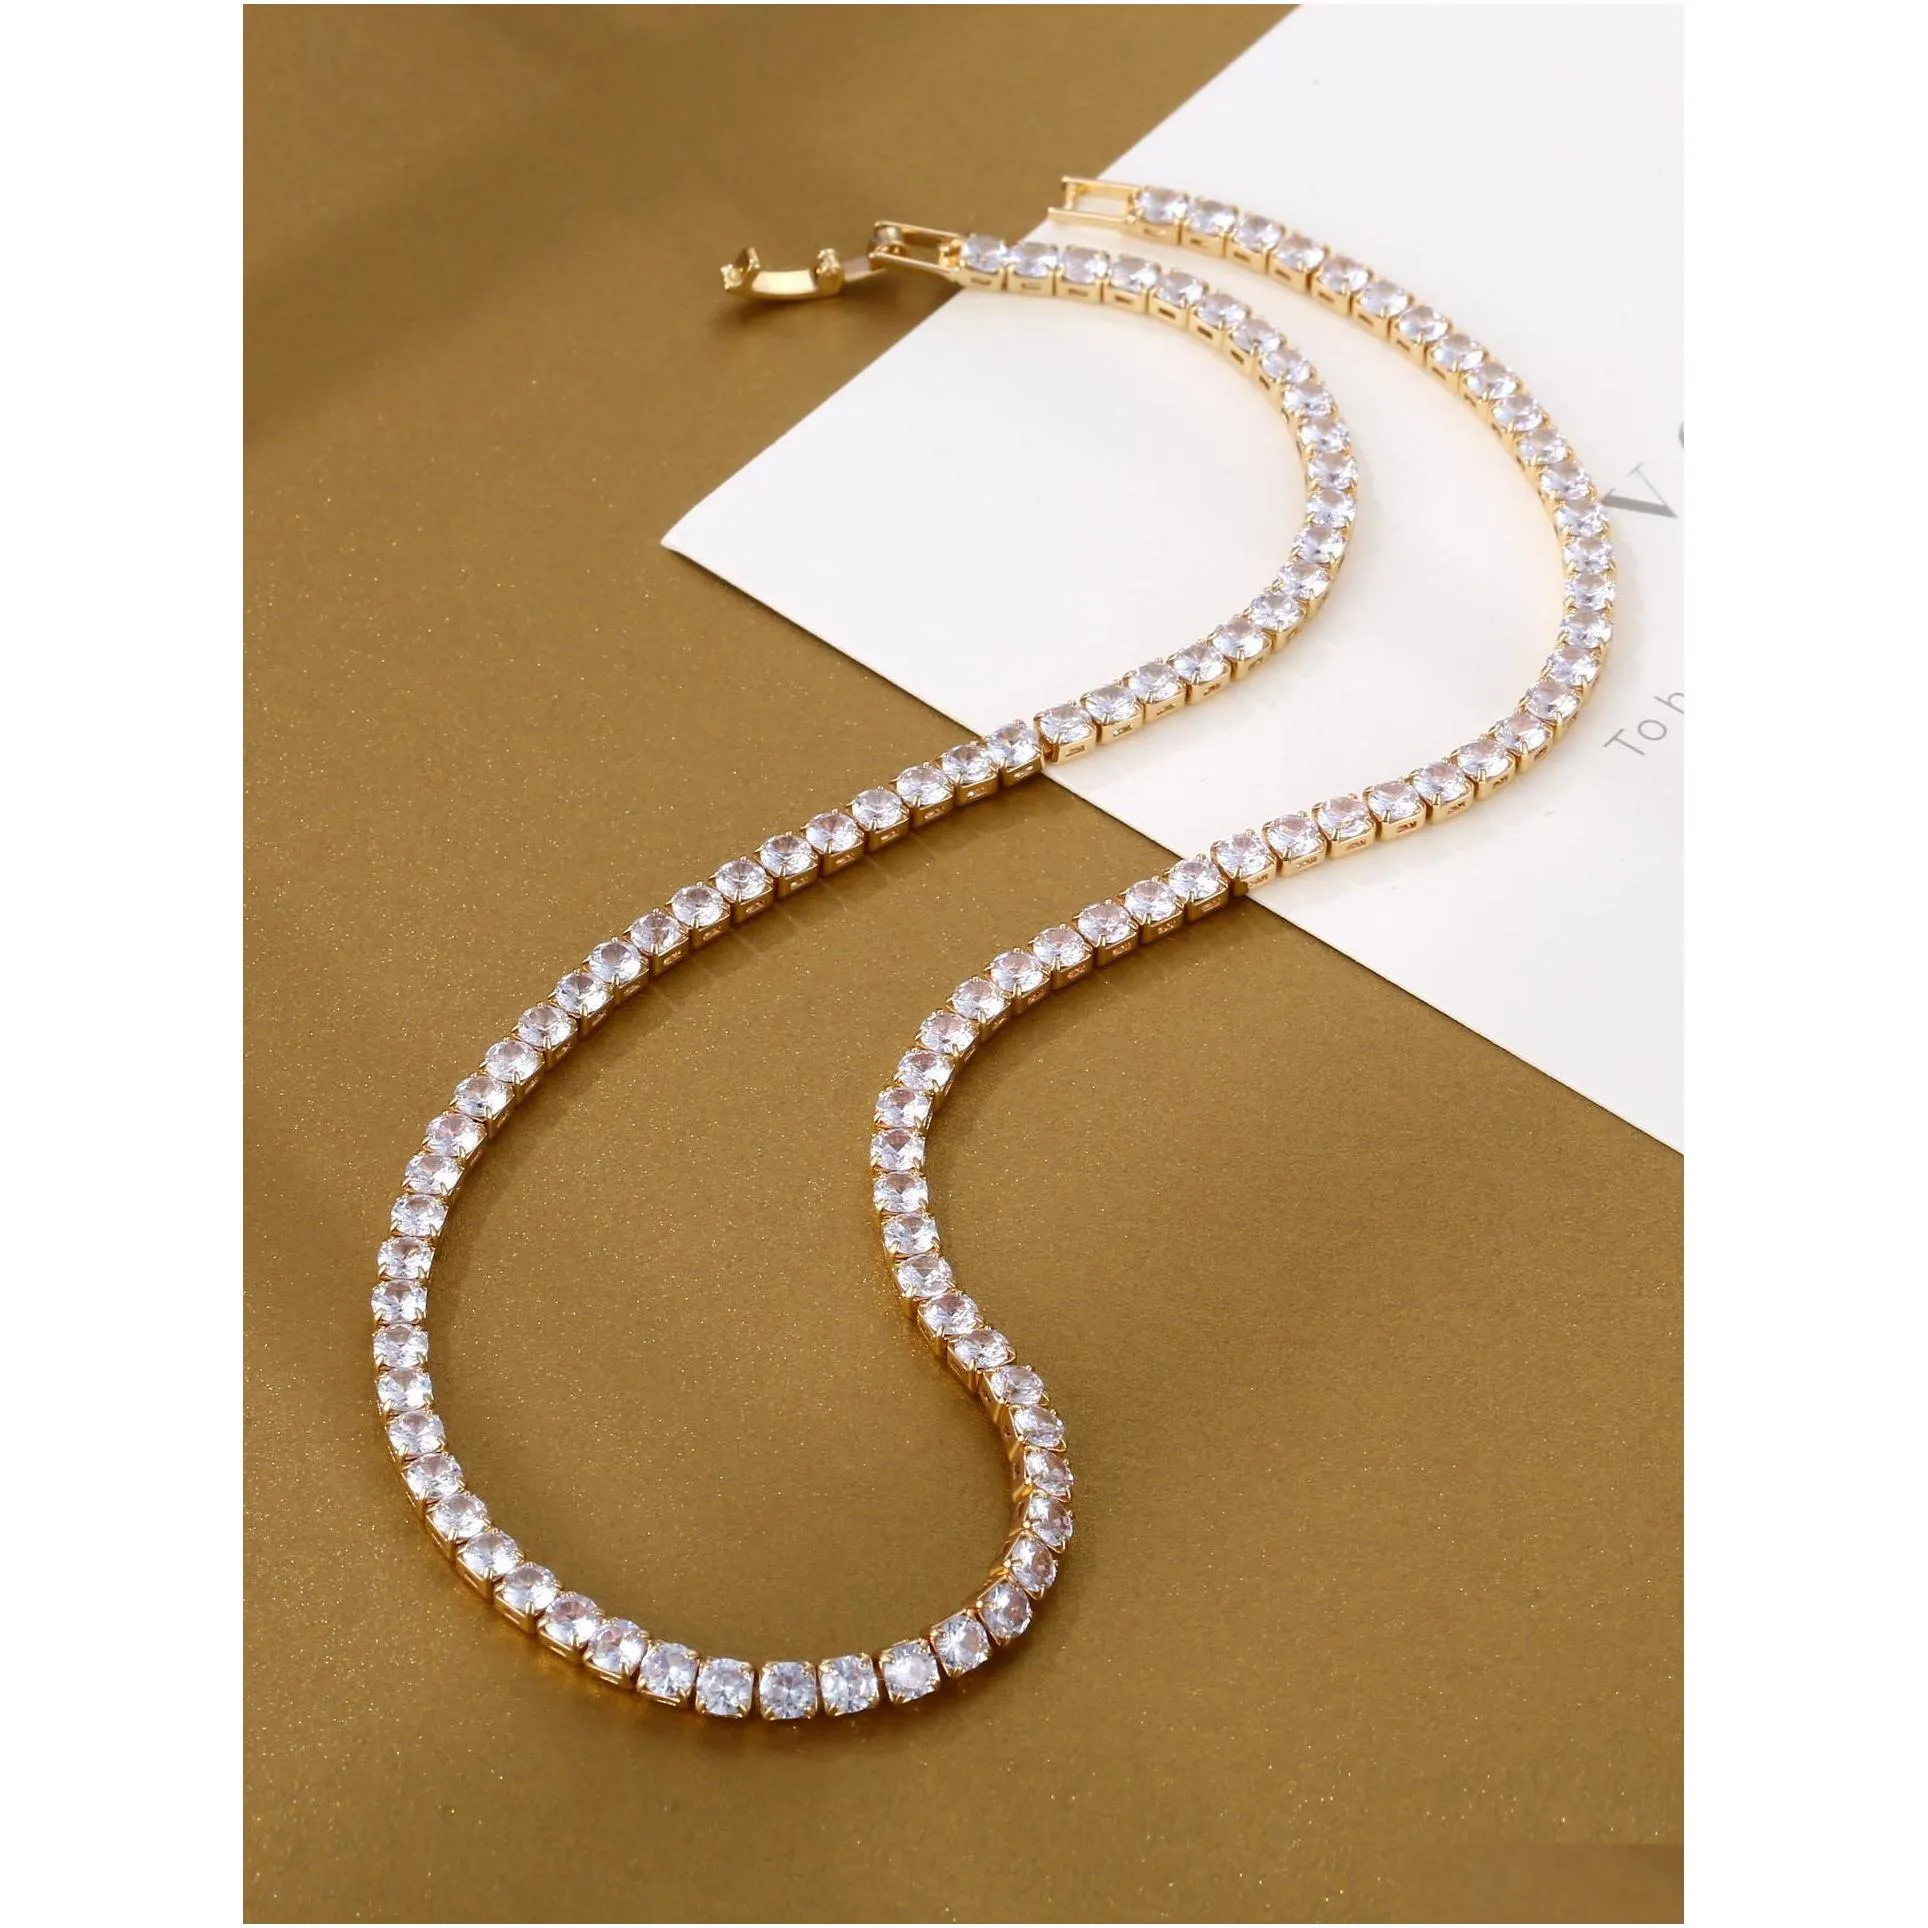 ins top sell tennis chain pendant hip hop fashion jewelry 18k gold filled white cubic zircon cz diamond gemstones eternity party women wedding necklace